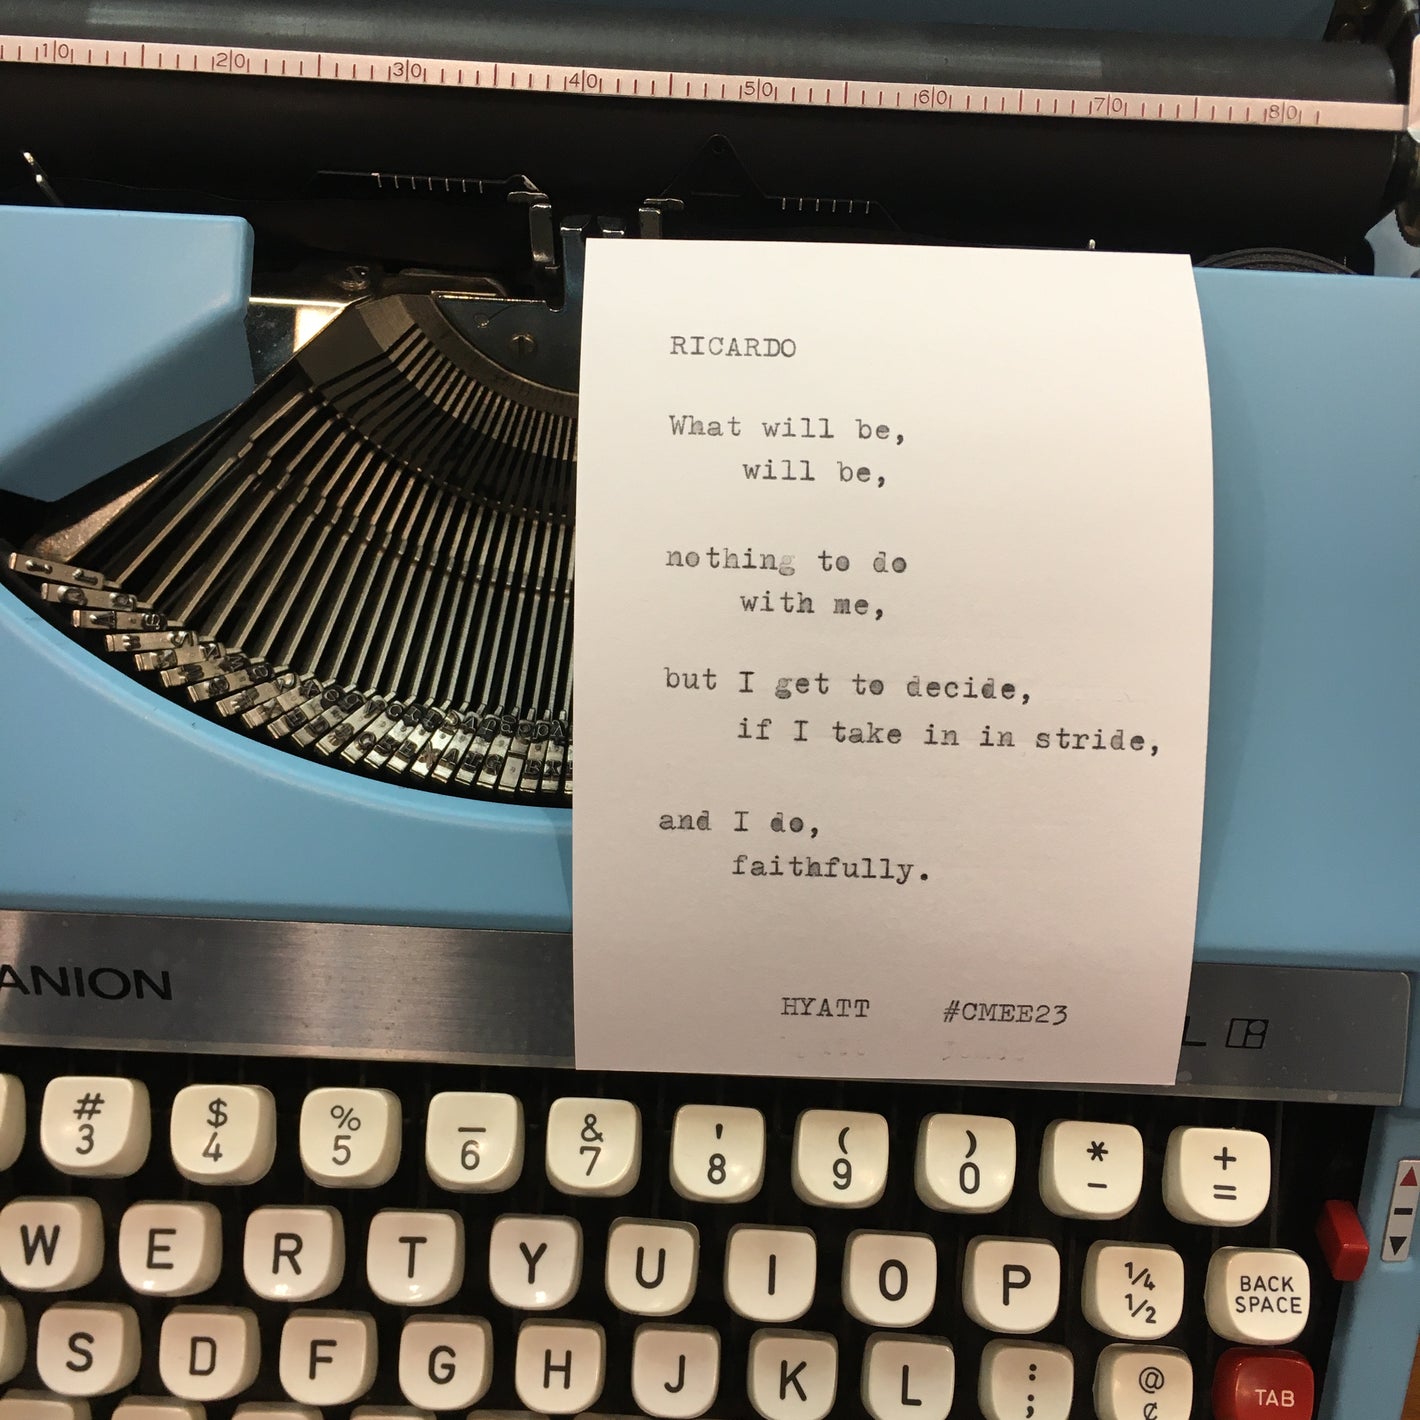 Hyatt booth activation typewriter poetry at CMEE23, Canadian Meetings + Events Expo: CMEExpo